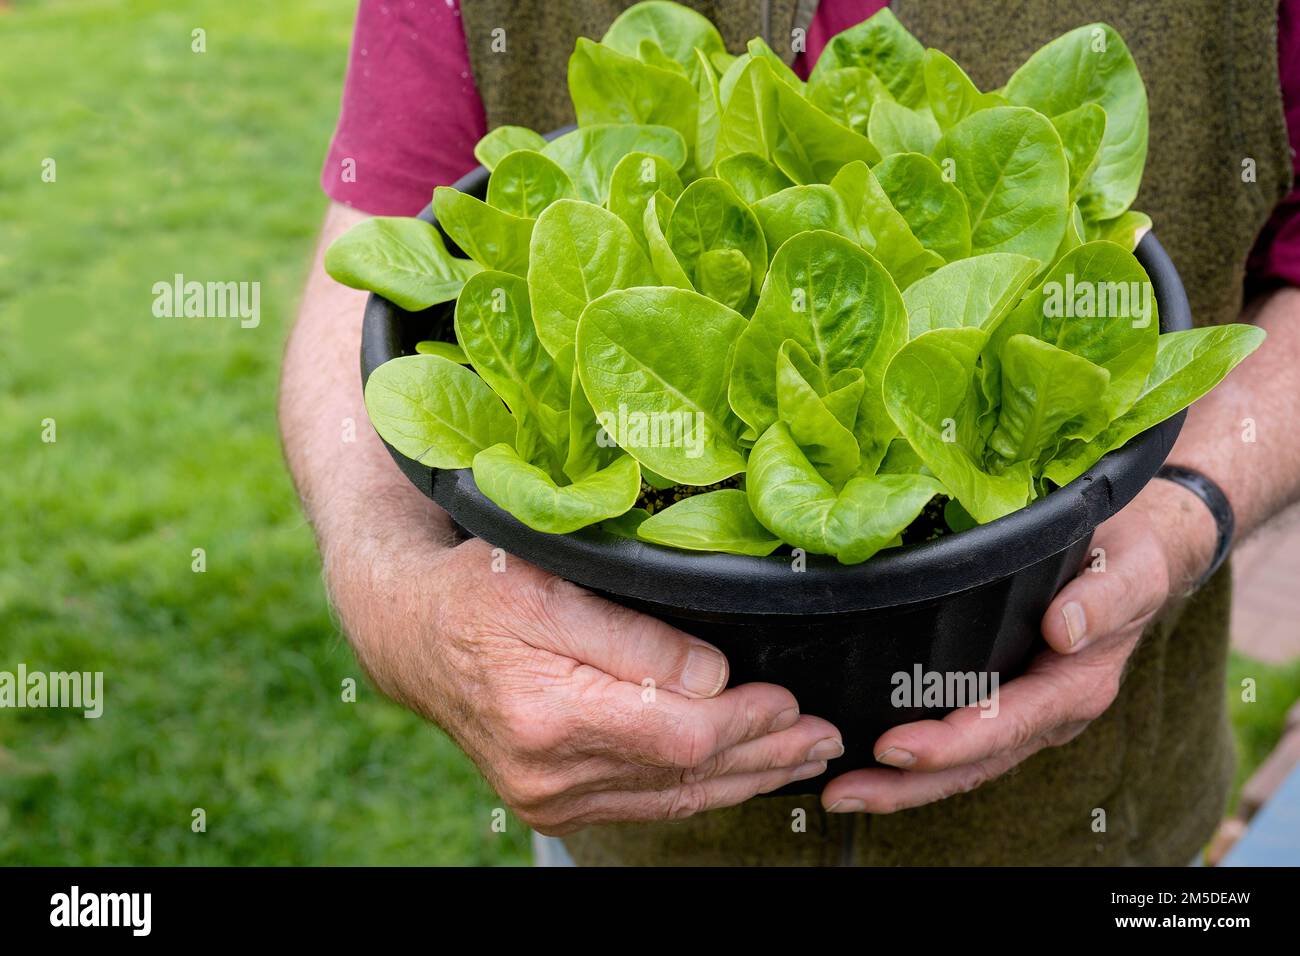 Fresh young romaine lettuce plants home grown in a planter. Stock Photo